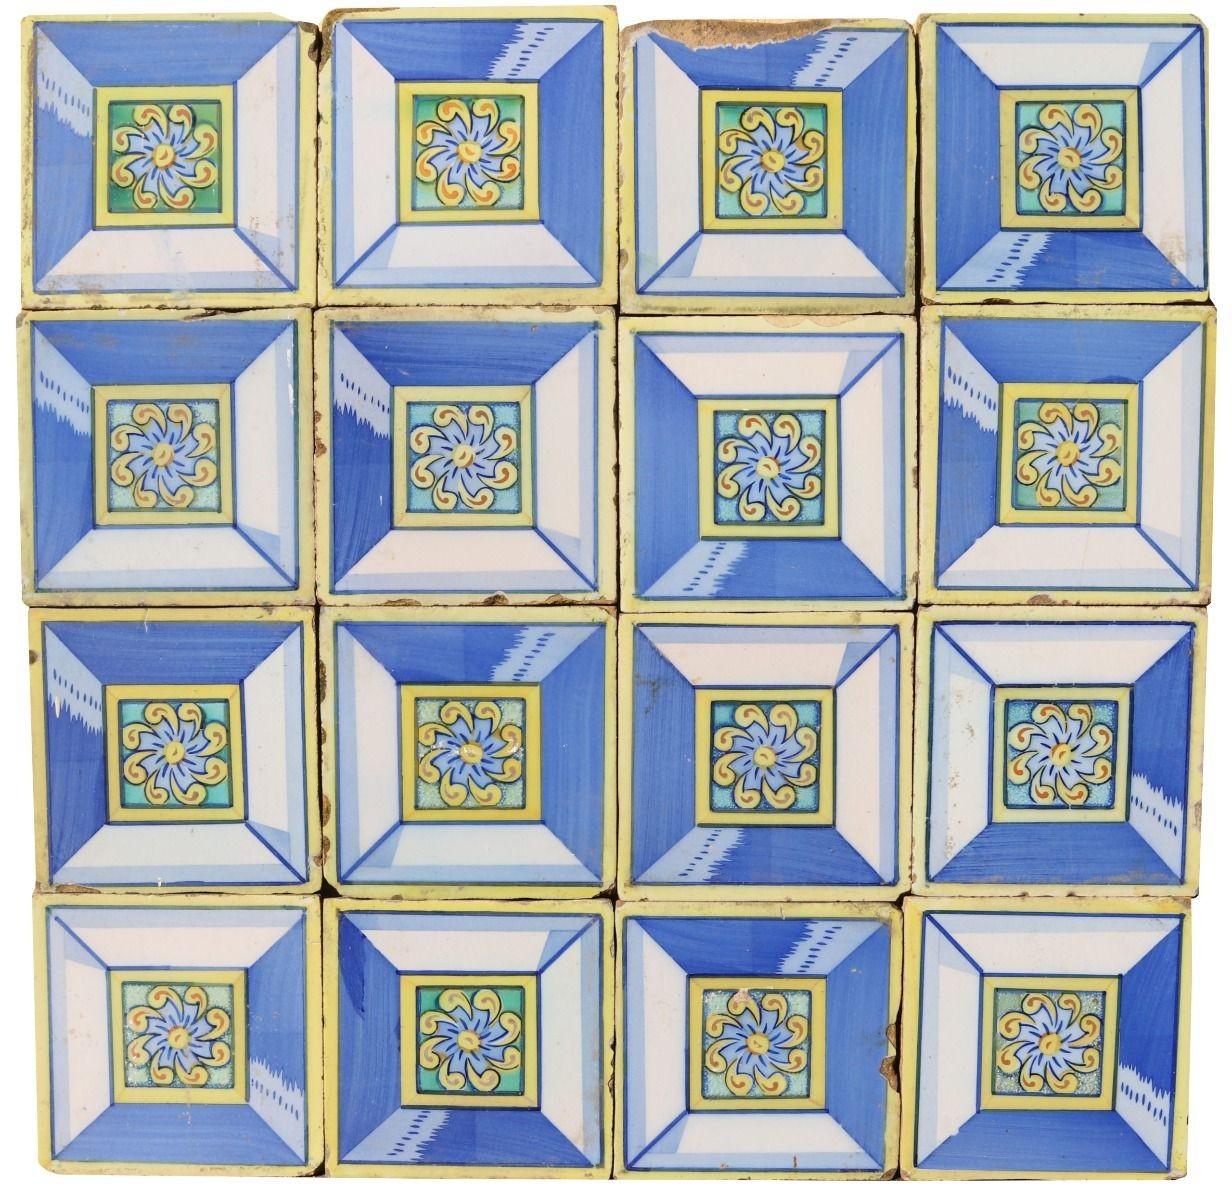 A reclaimed tile panel consisting of 17 glazed ceramic tiles decorated in blue and yellow. This could be used as a splash back, or wall decoration. Overall size of panel as pictured 60 x 60 cm (23.62 x 23.62 in)